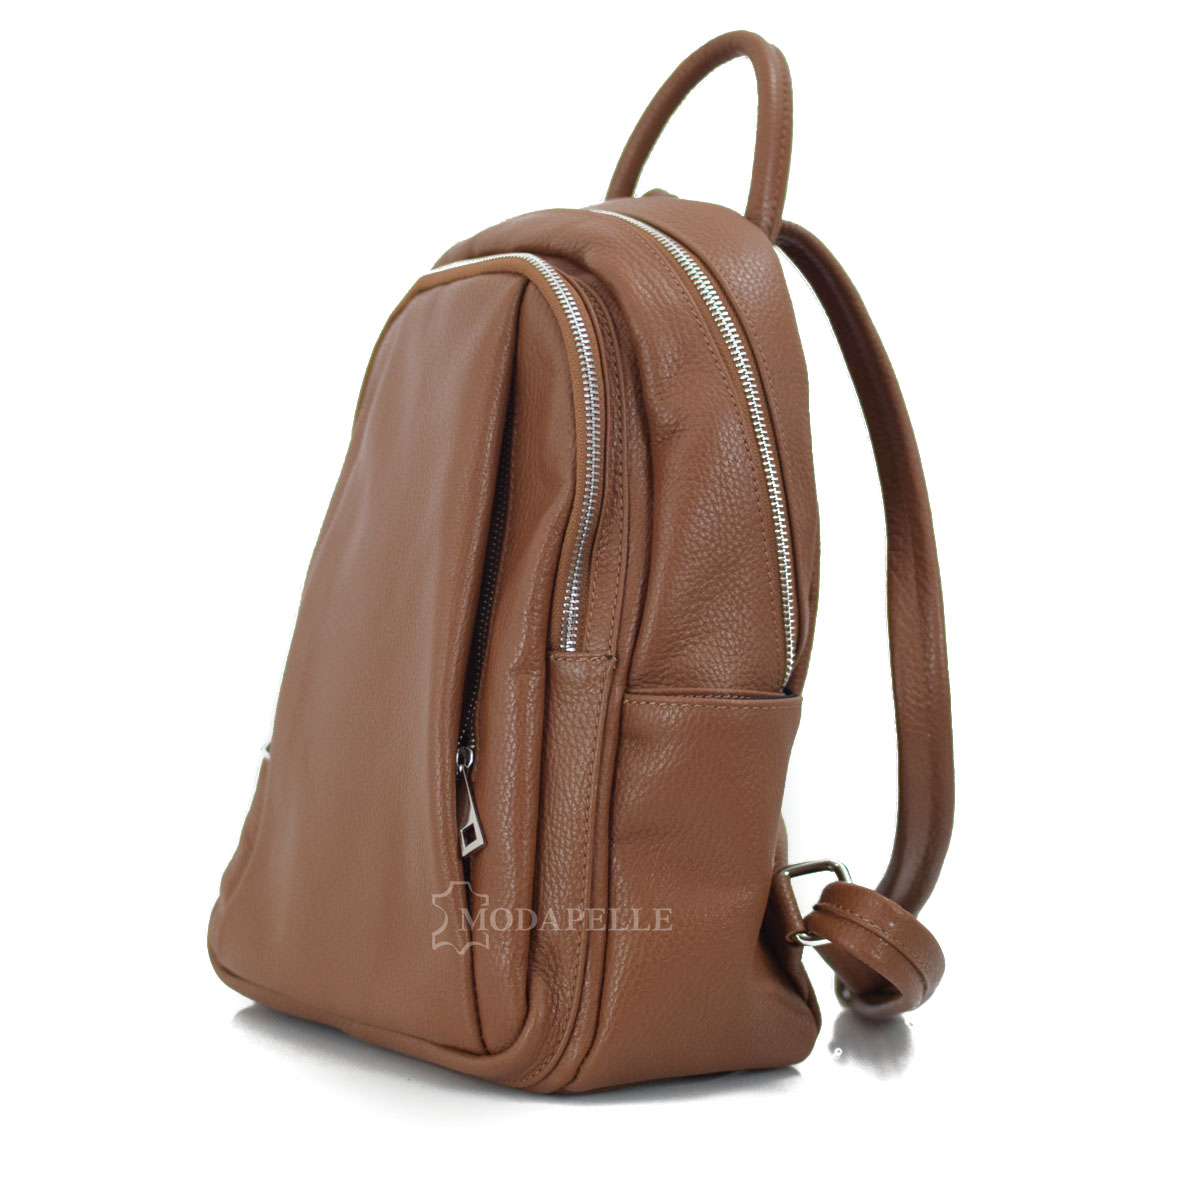 Leather backpack in tan color - made in Italy - Modapelle